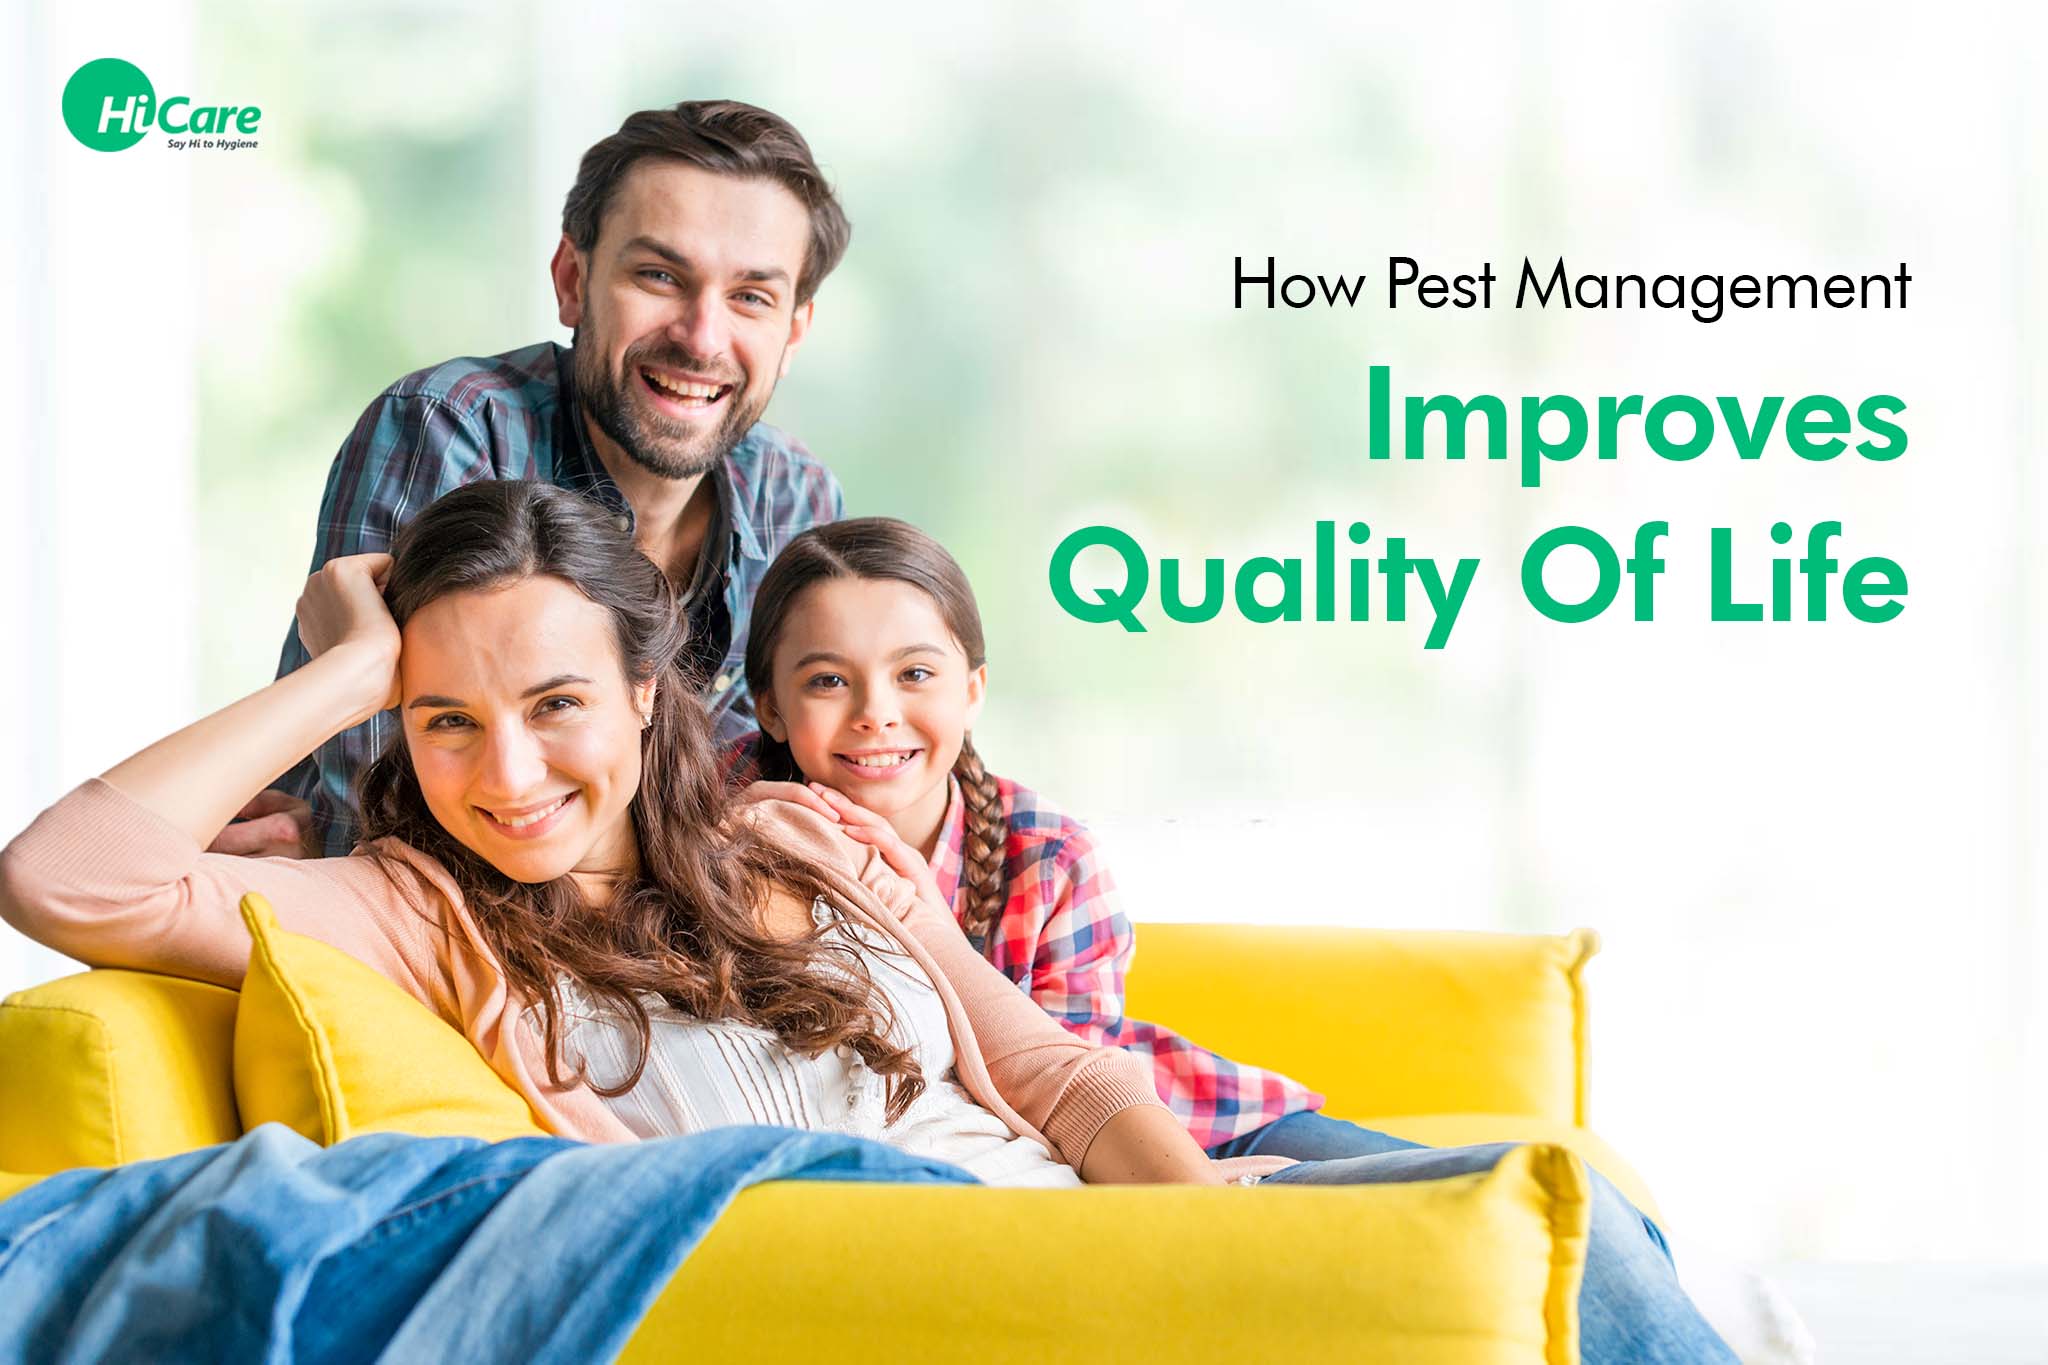 how pest management improves quality of life